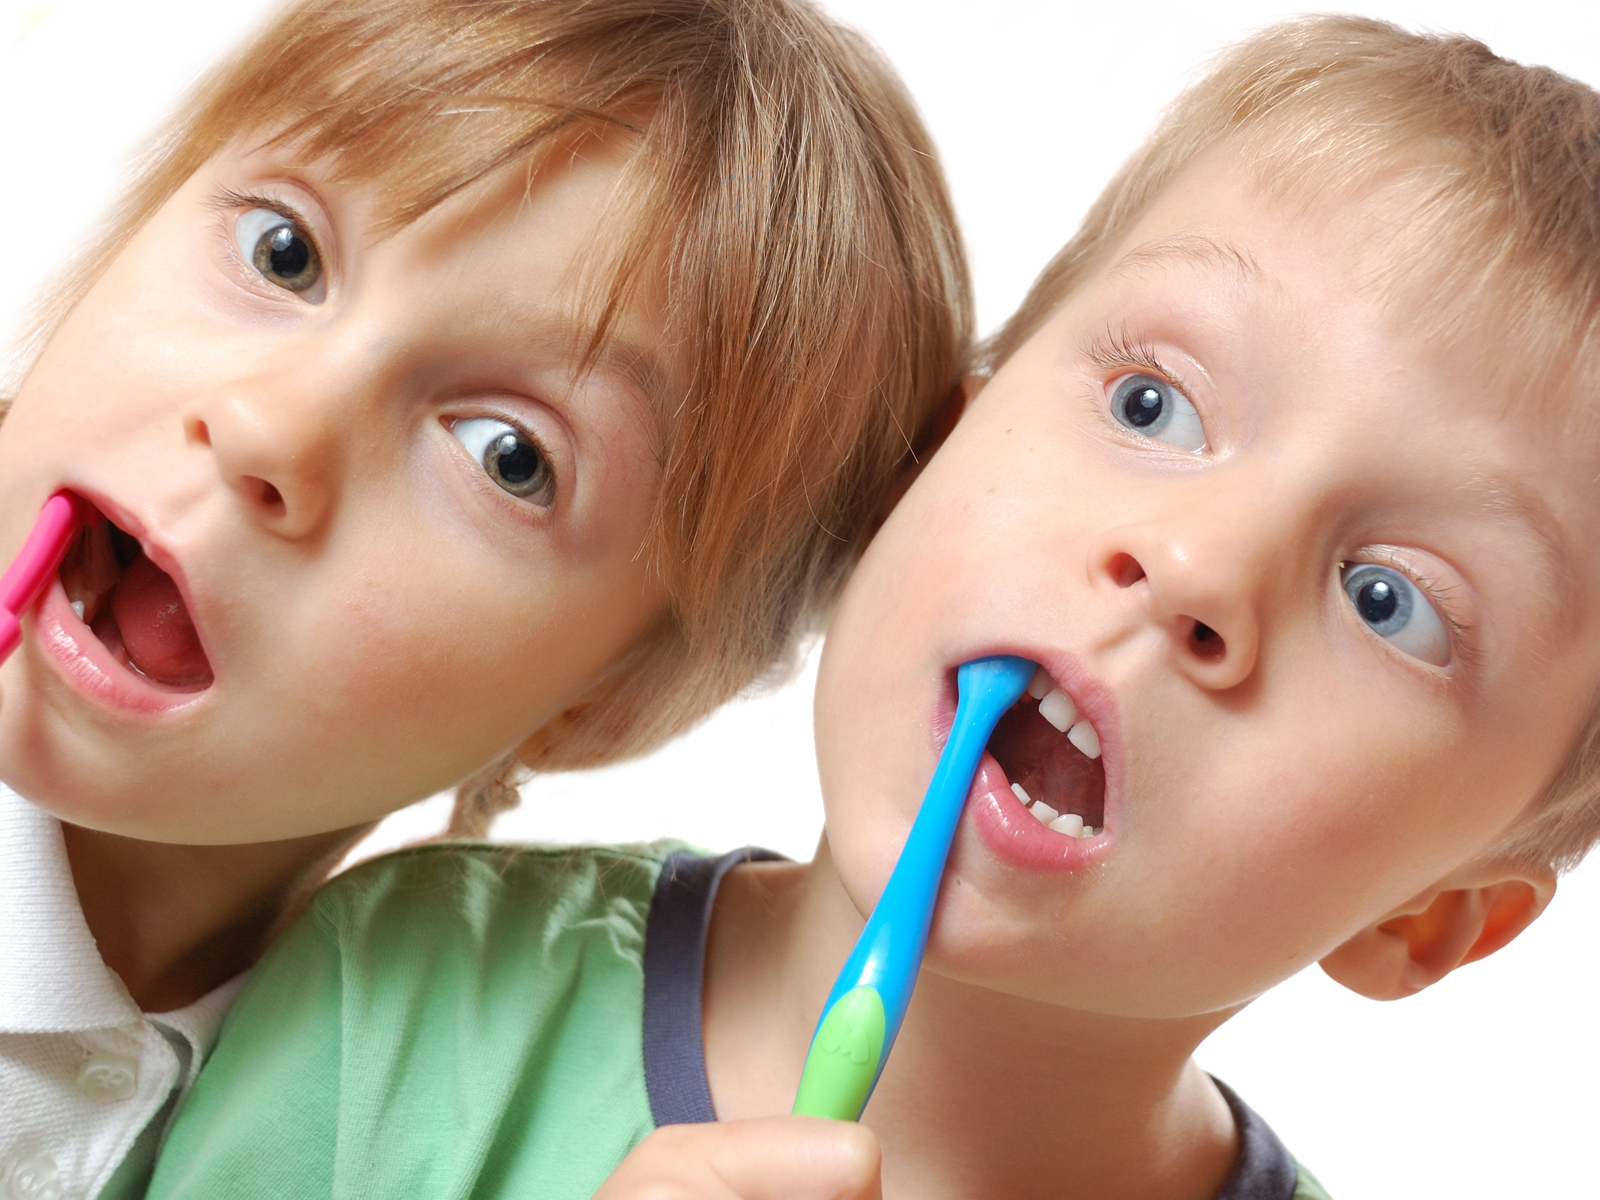 Children’s teeth cleaning routines during Coronavirus disease 2019: Do’s & Don’ts